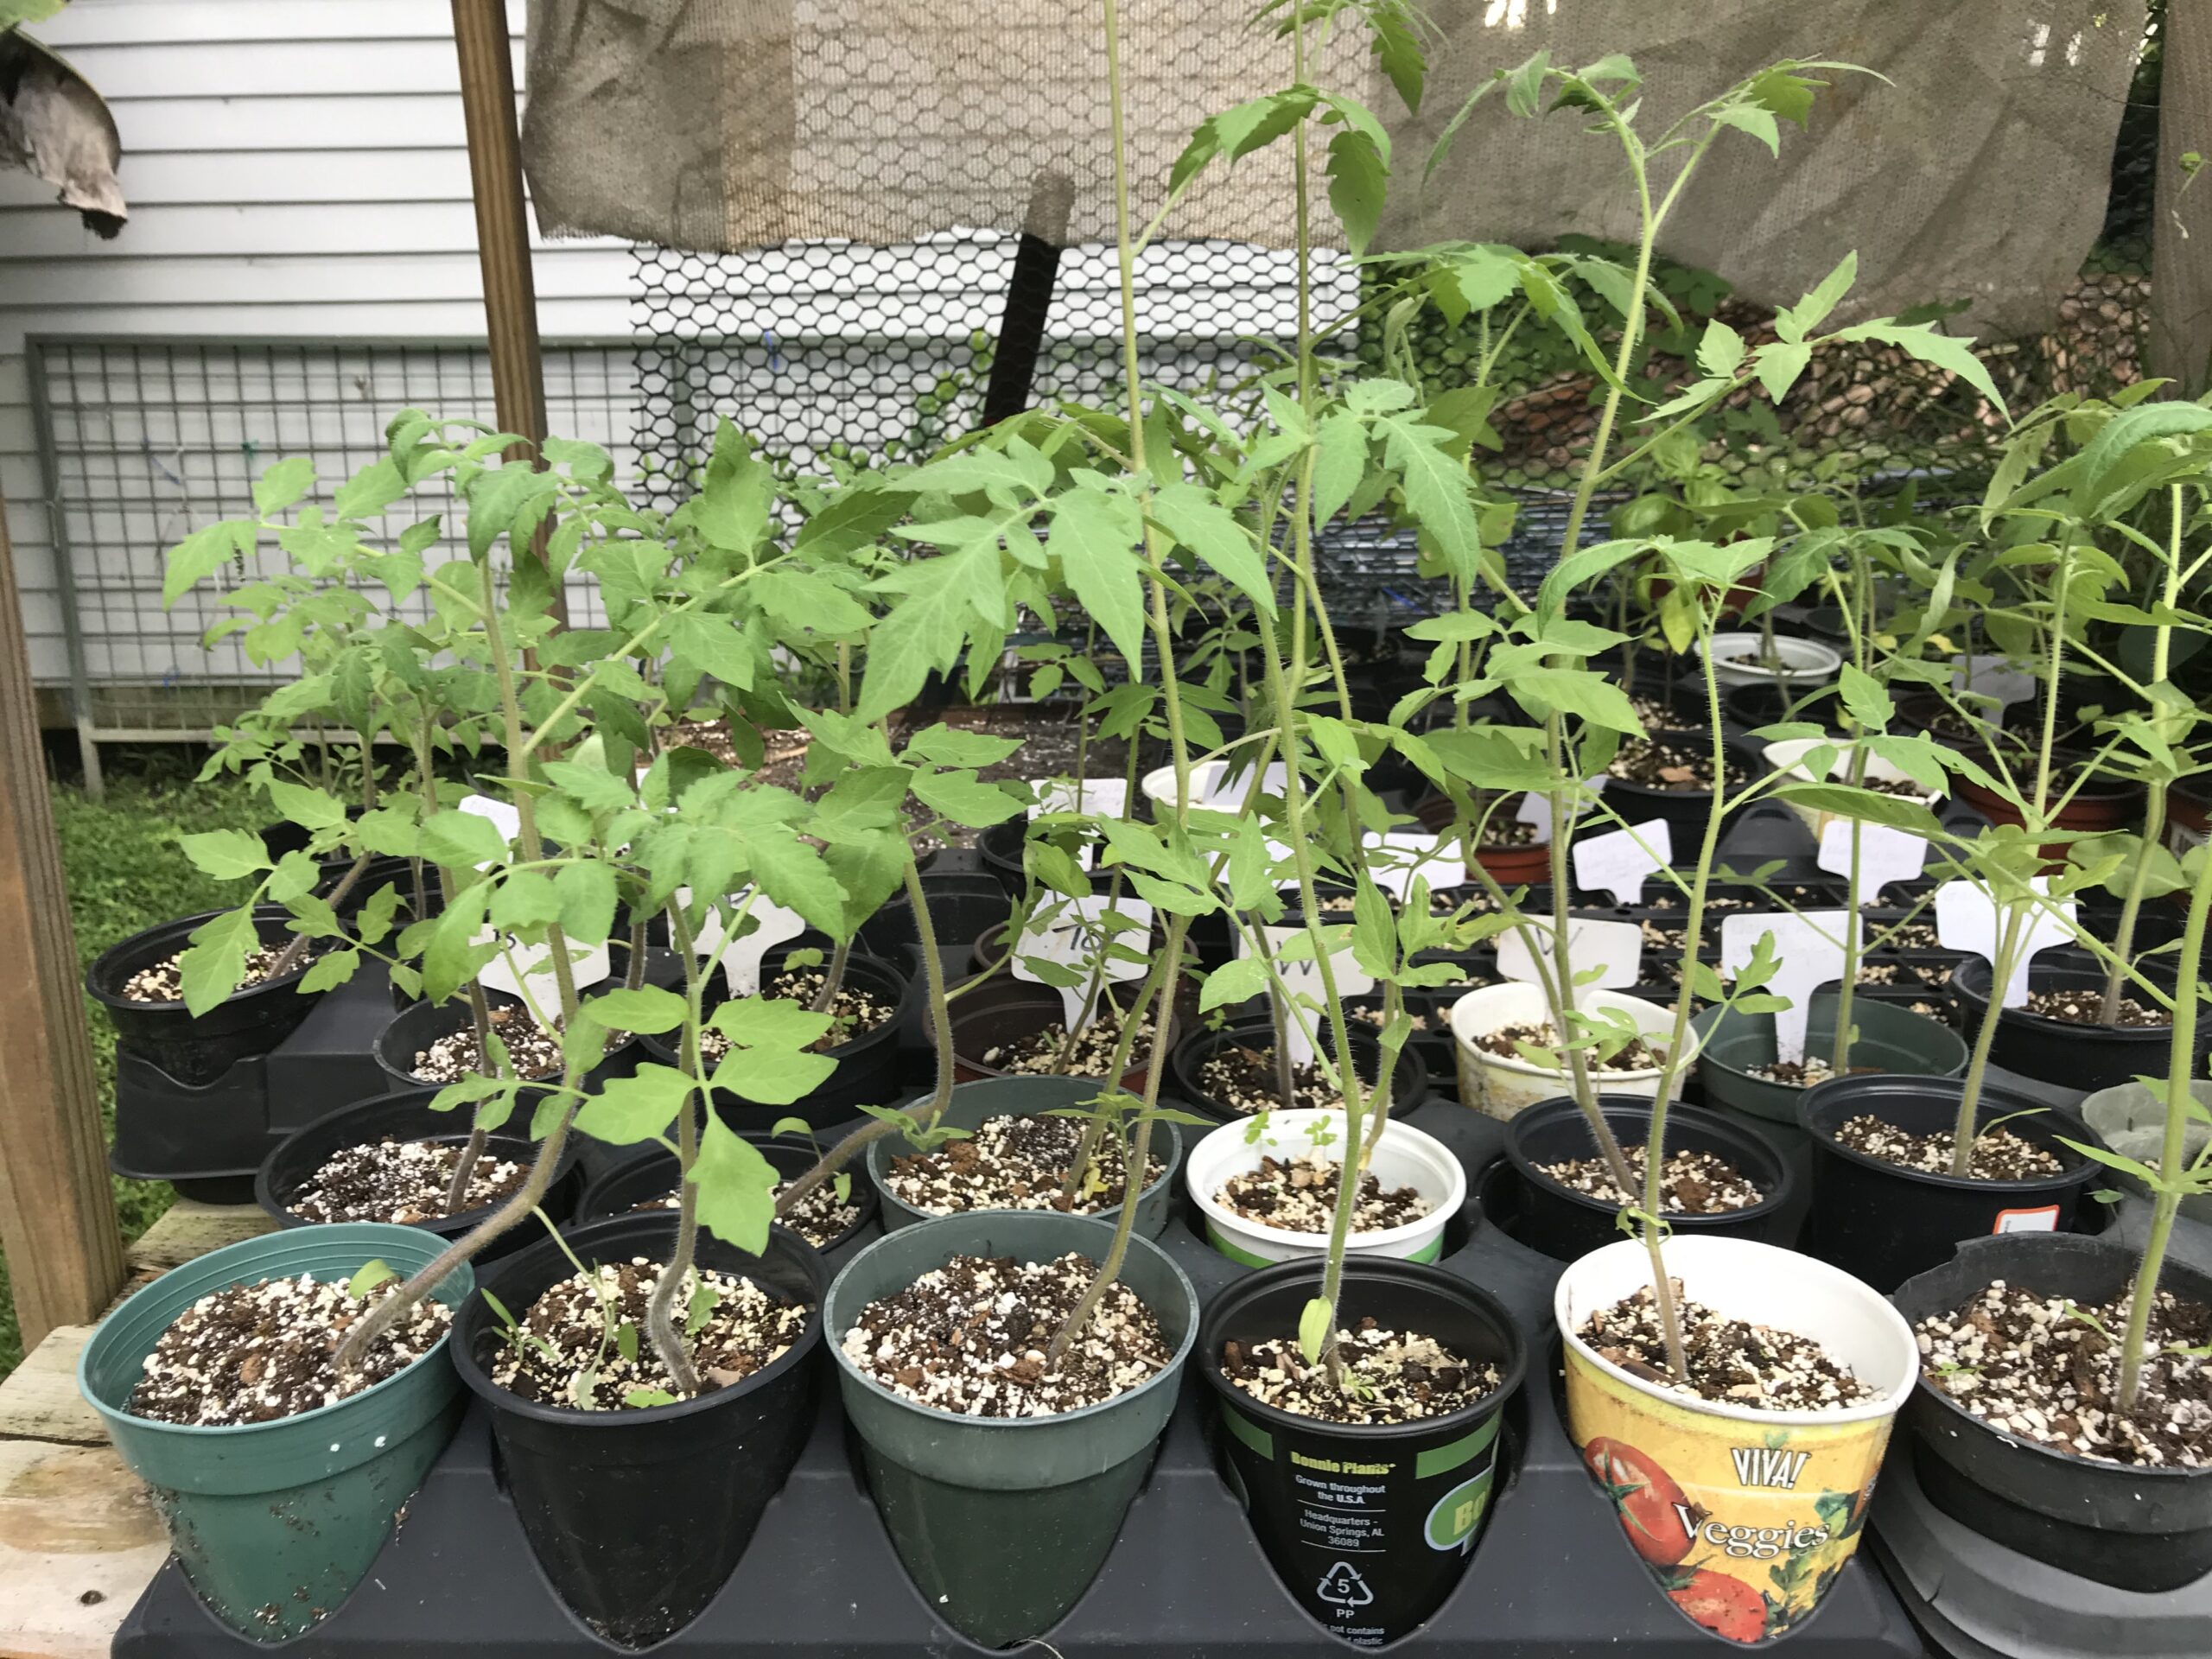 Variety of tomato seedlings in 4 inch pots